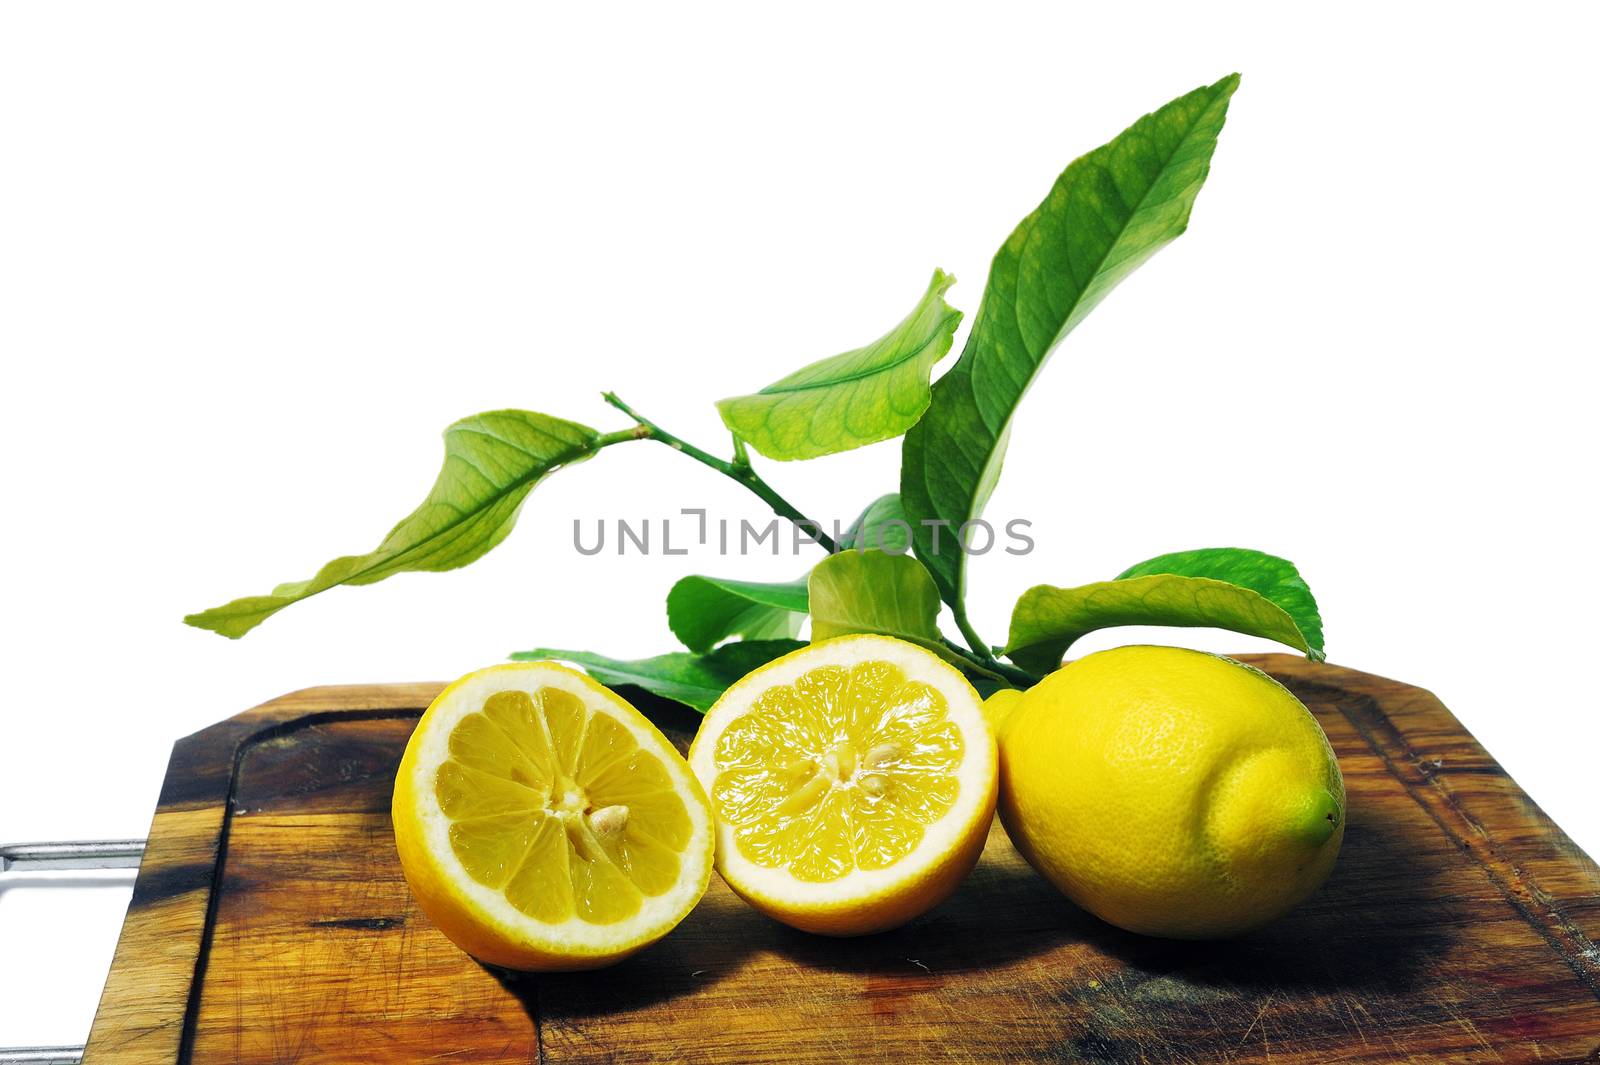 lemons with leaves on a cutting board ready to be cooked